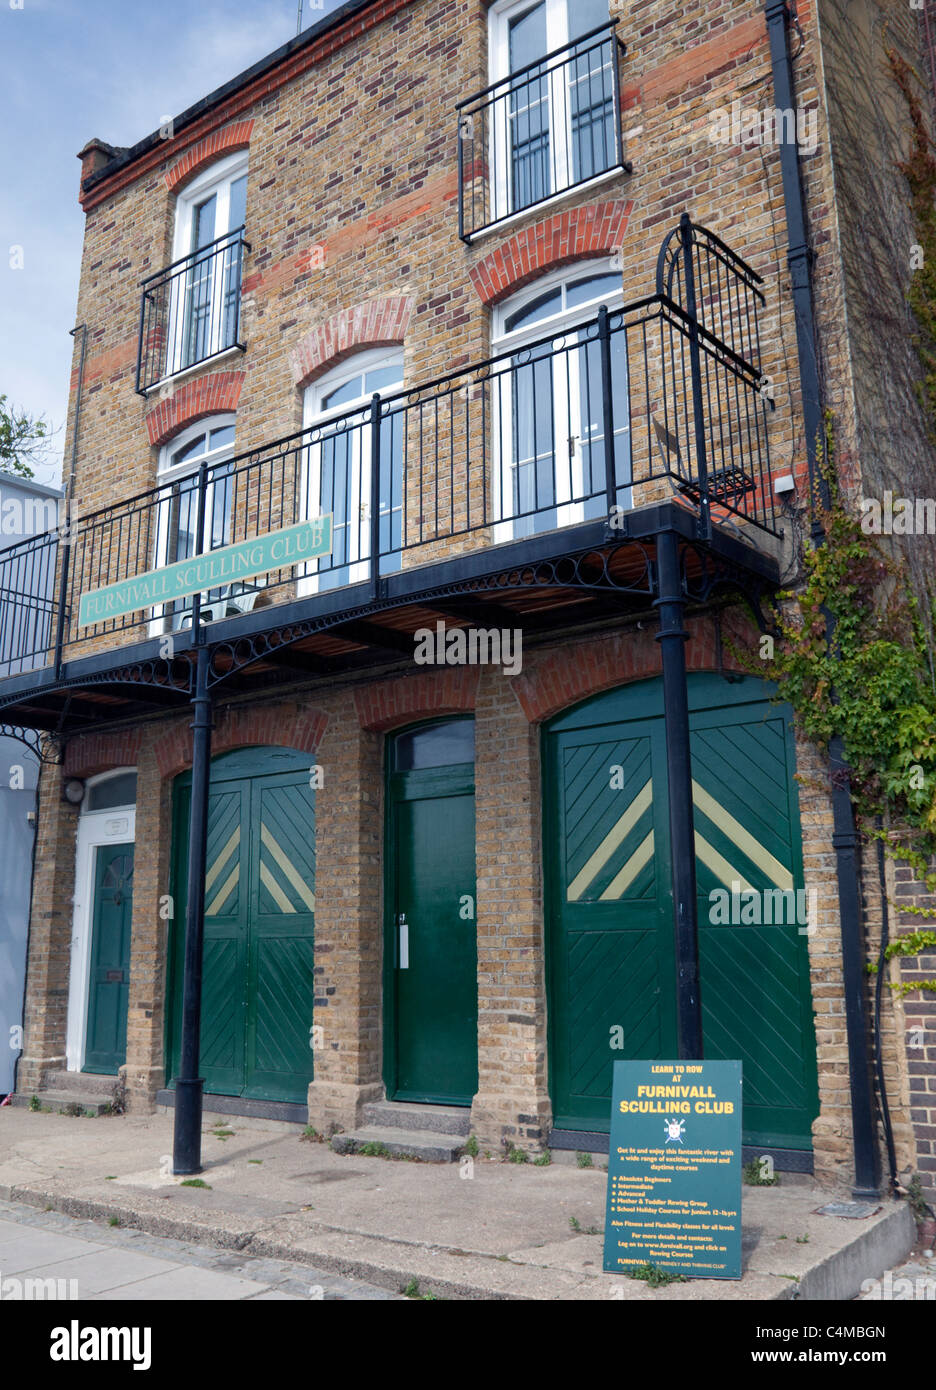 Furnivall Sculling Club boathouse, Hammersmith, Londres Foto de stock